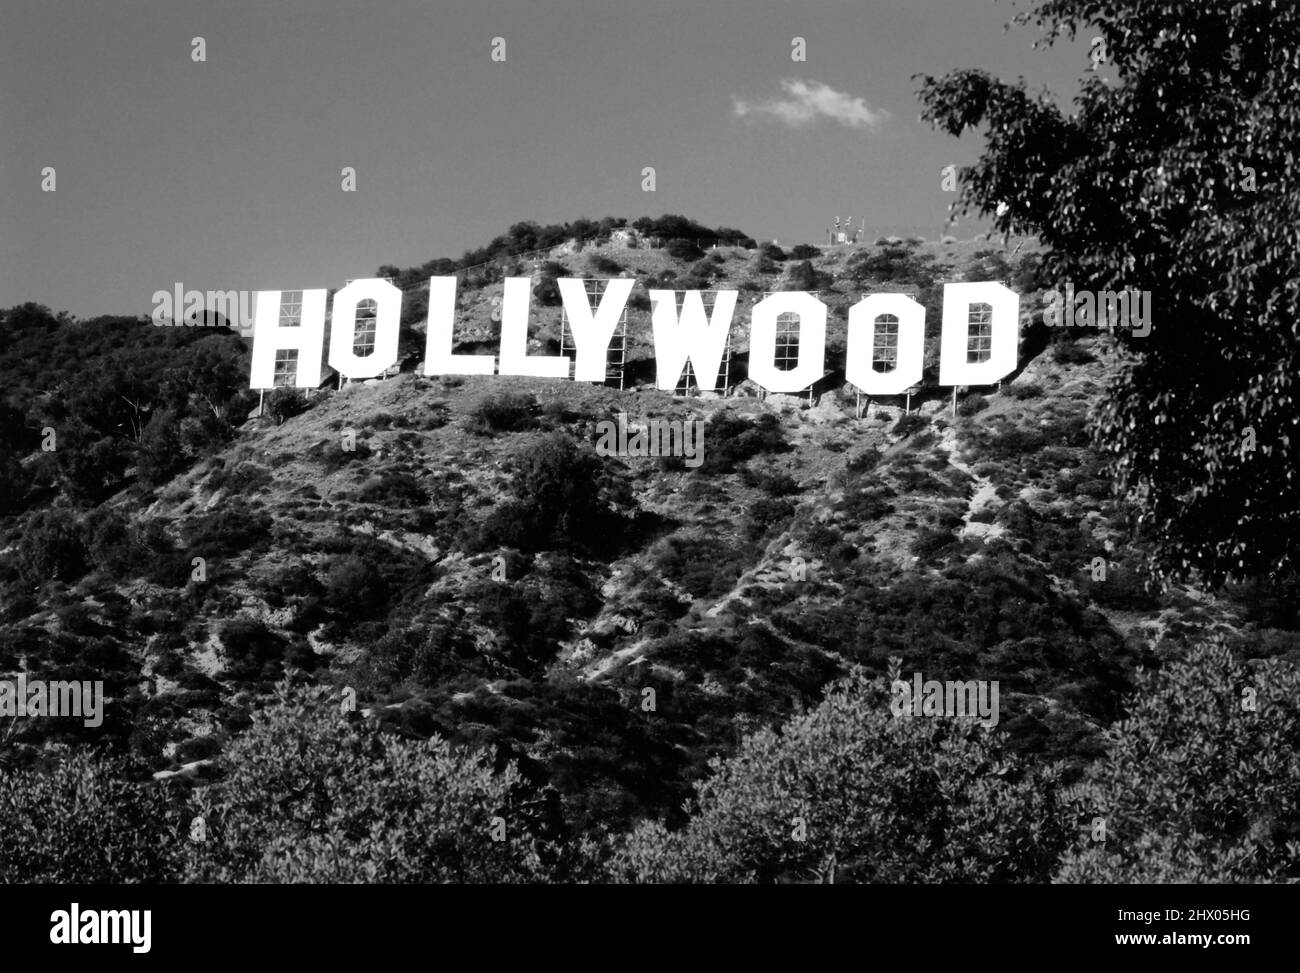 The iconic Hollywood Sign in Los Angeles, CA Stock Photo